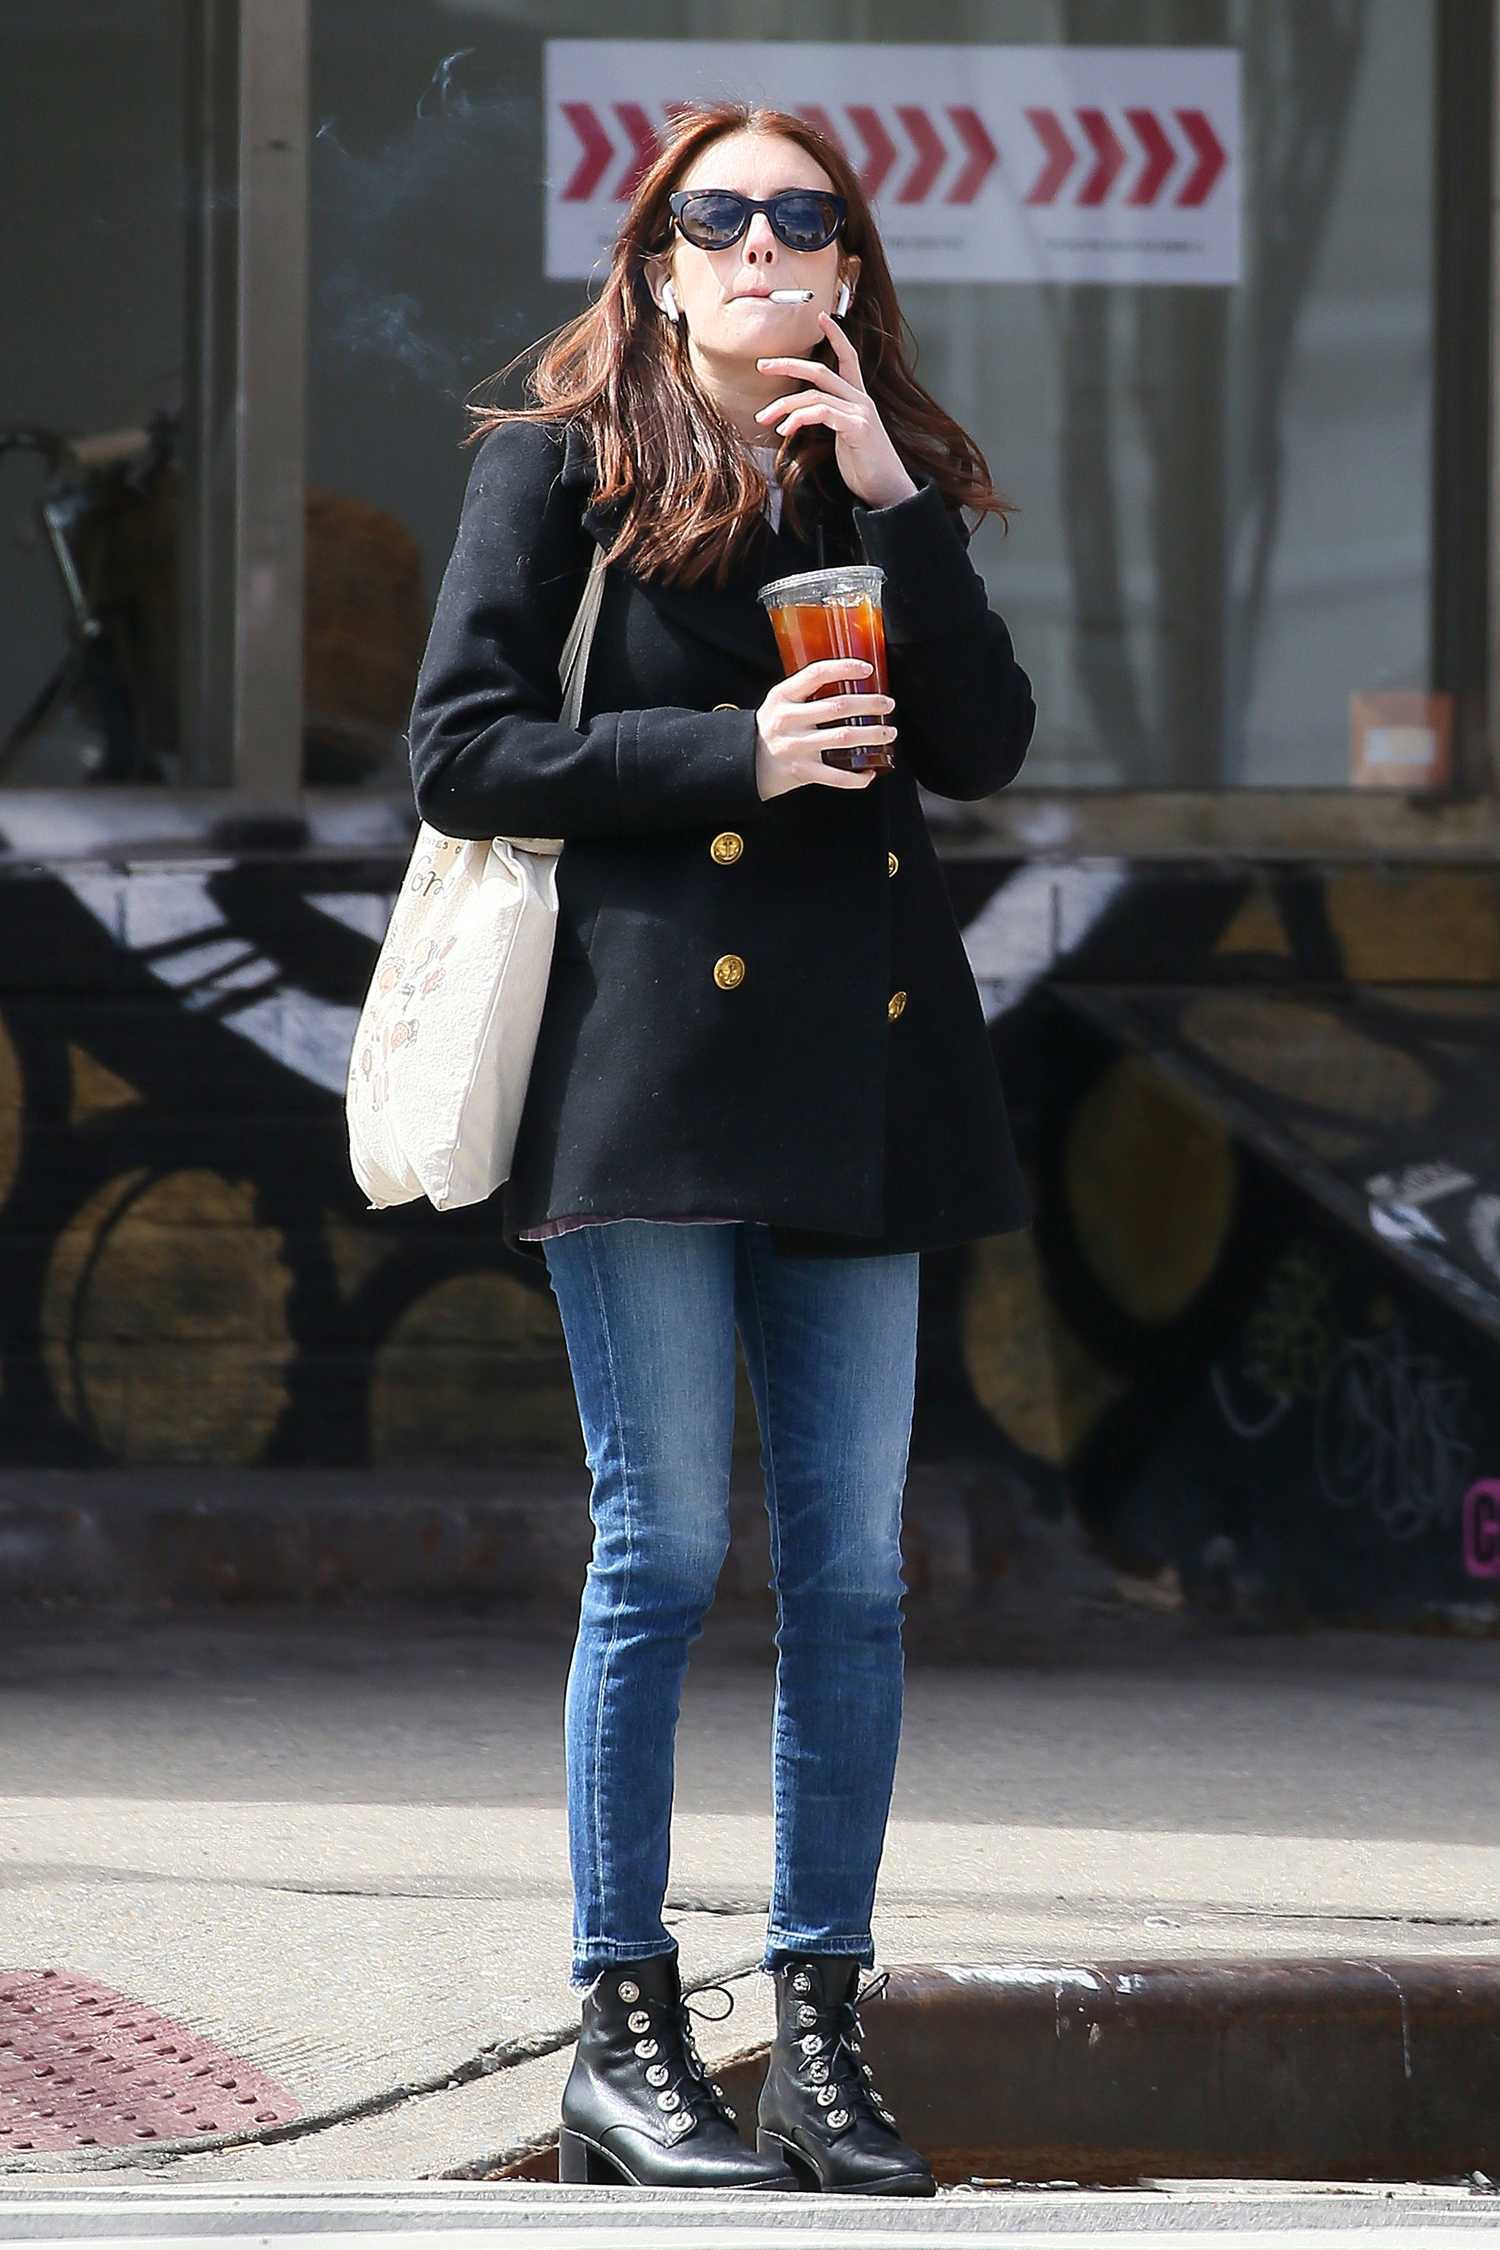 Emma Roberts Has a Smoke While Out in New York – Celeb Donut